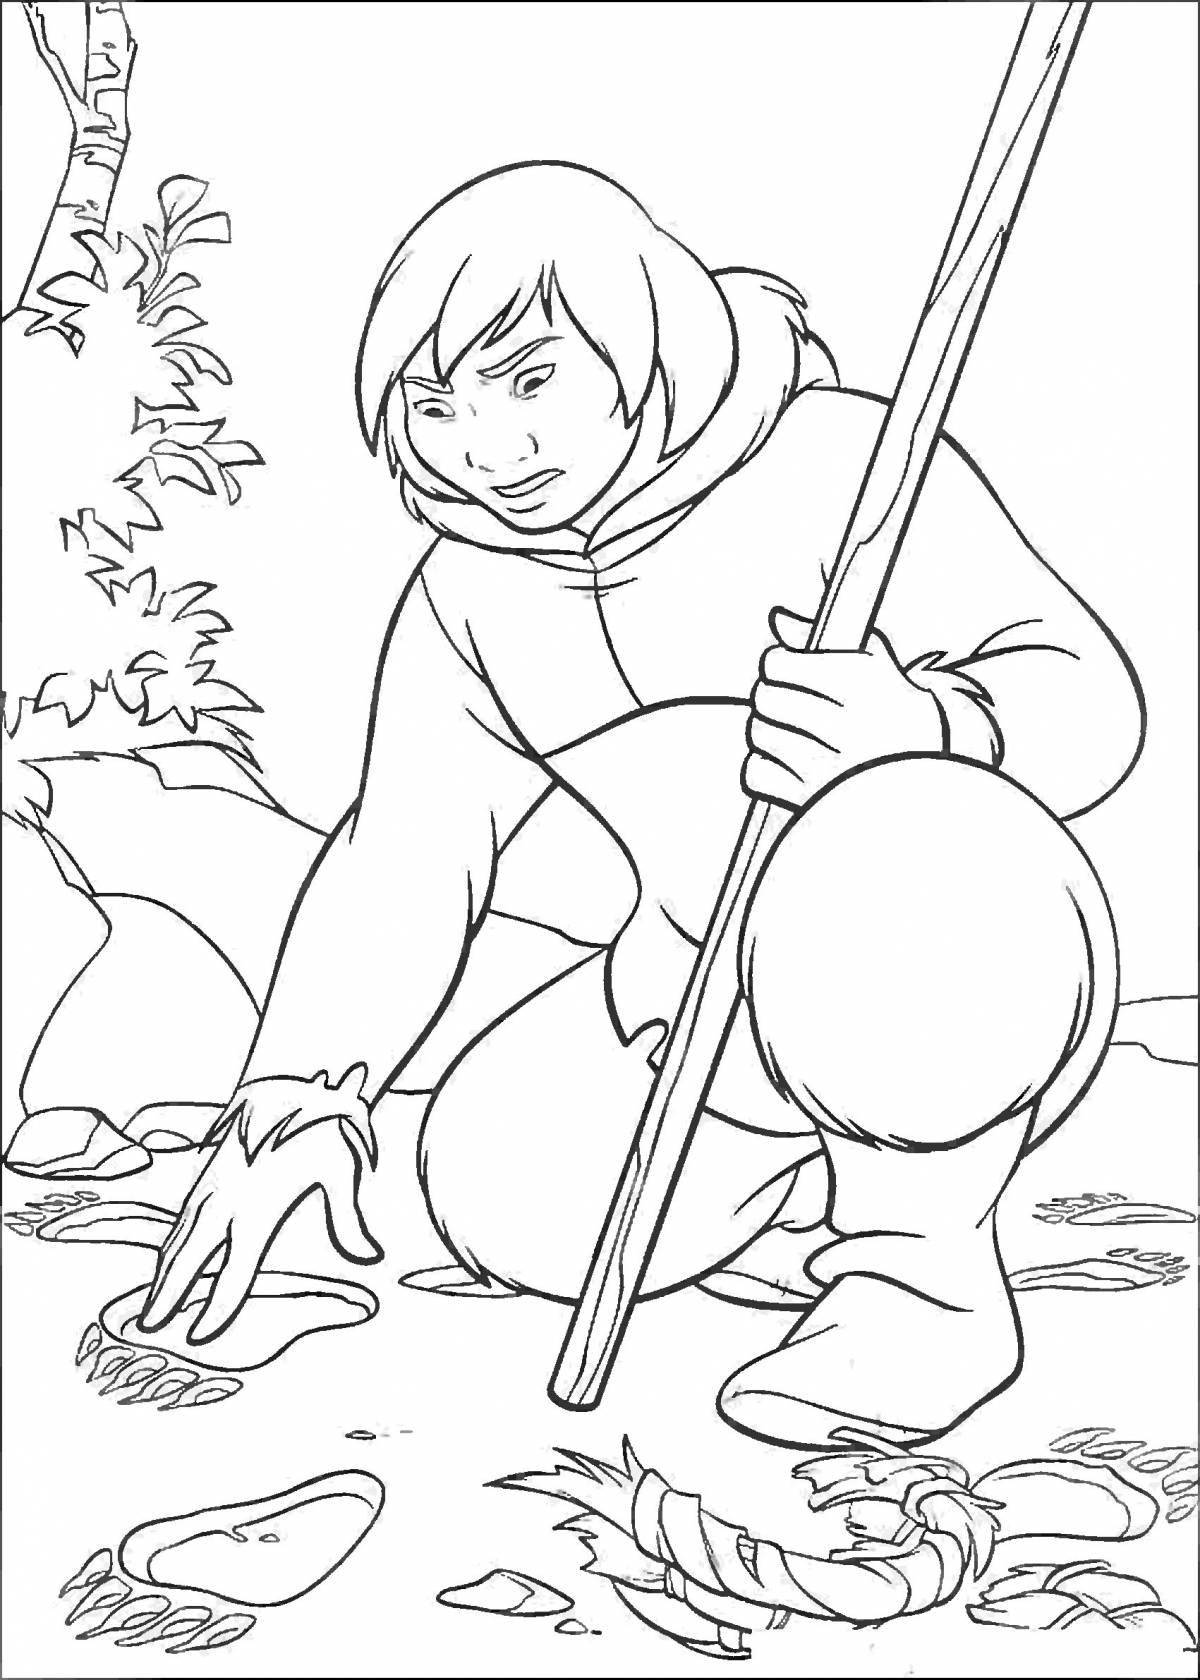 Brilliant hunter coloring pages for kids